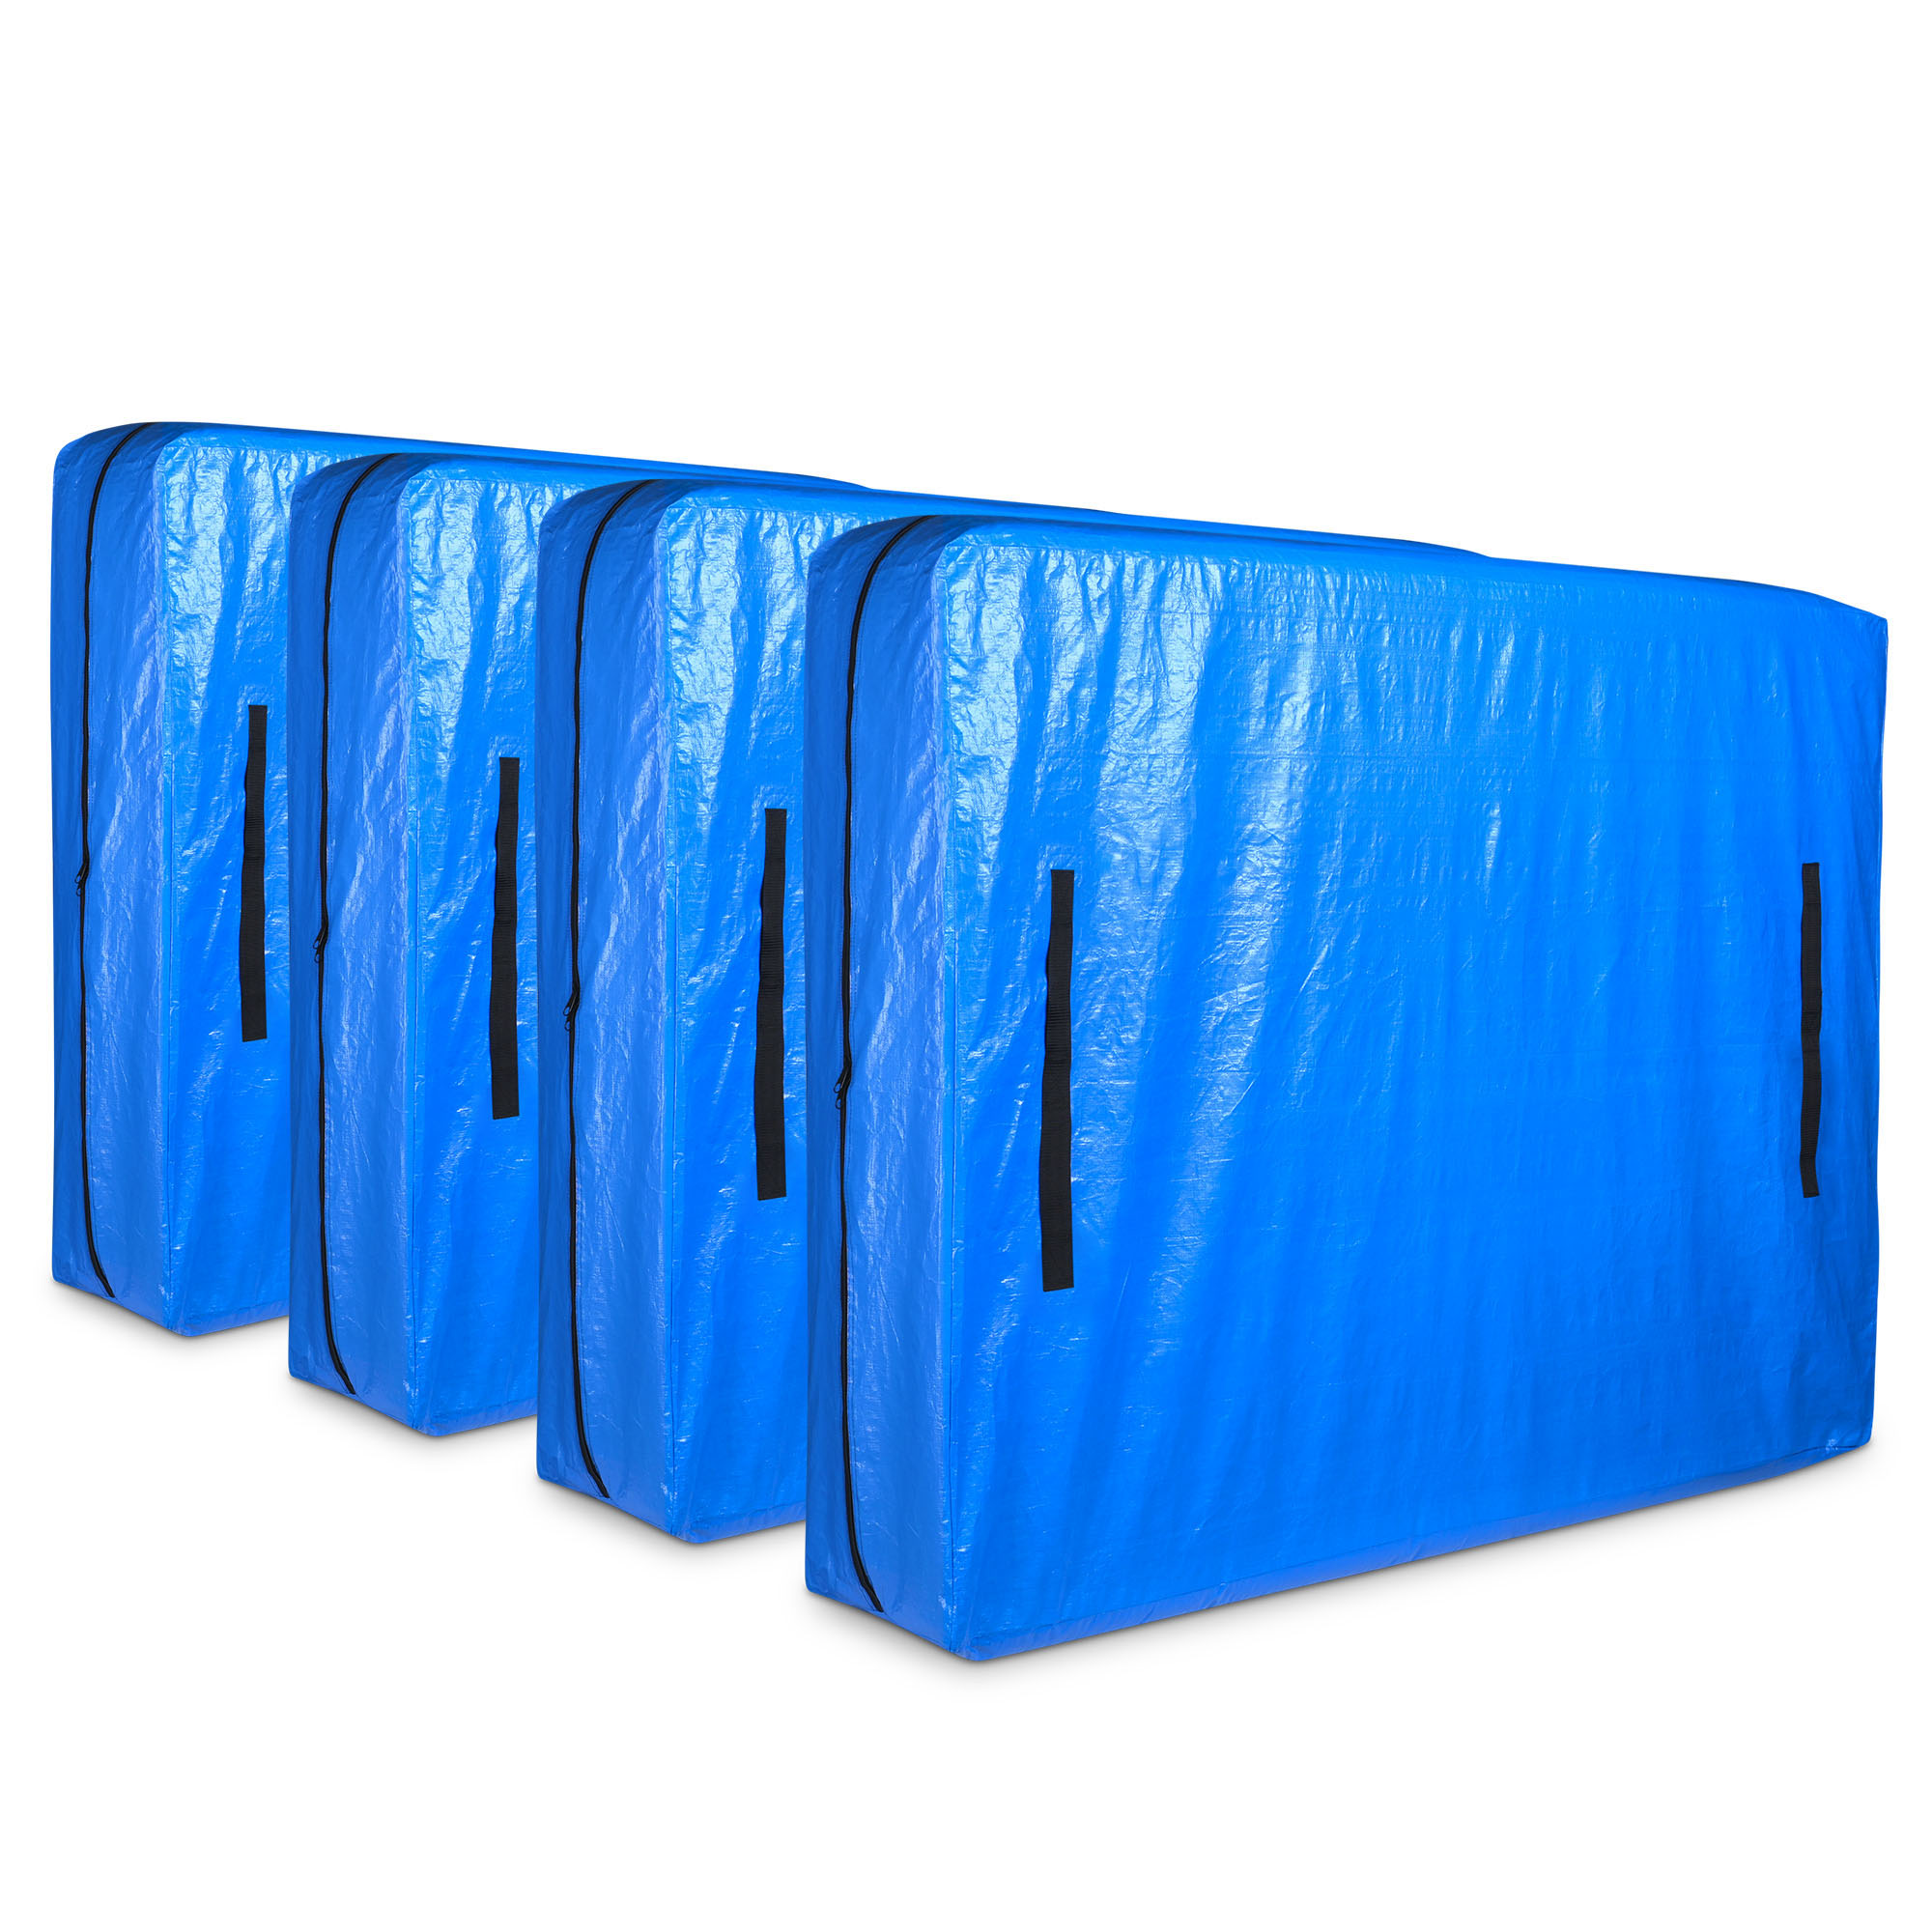 Yescom Mattress Bag Protector for Moving Storage Heavy Duty 8 Handles Moving Mattress cover King Size 4 Pack